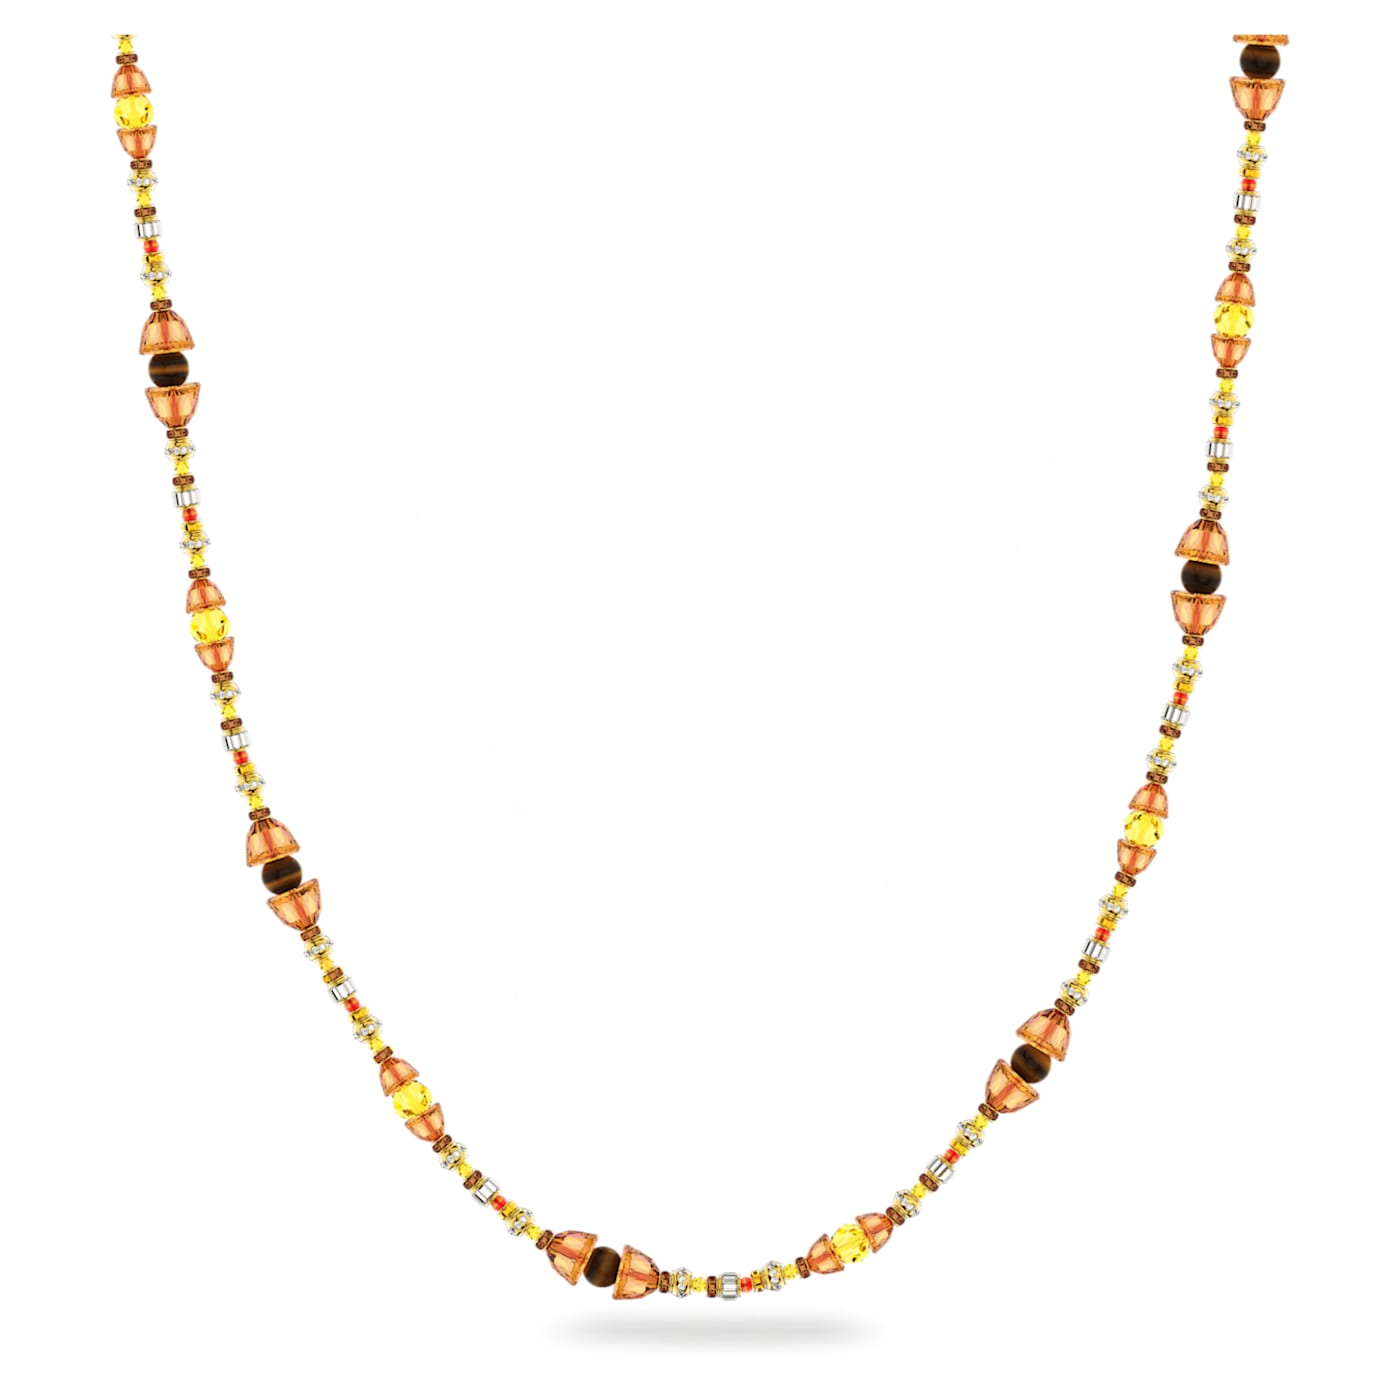 SOMNIA EXTRA LONG NECKLACE, BROWN, GOLD-TONE PLATED